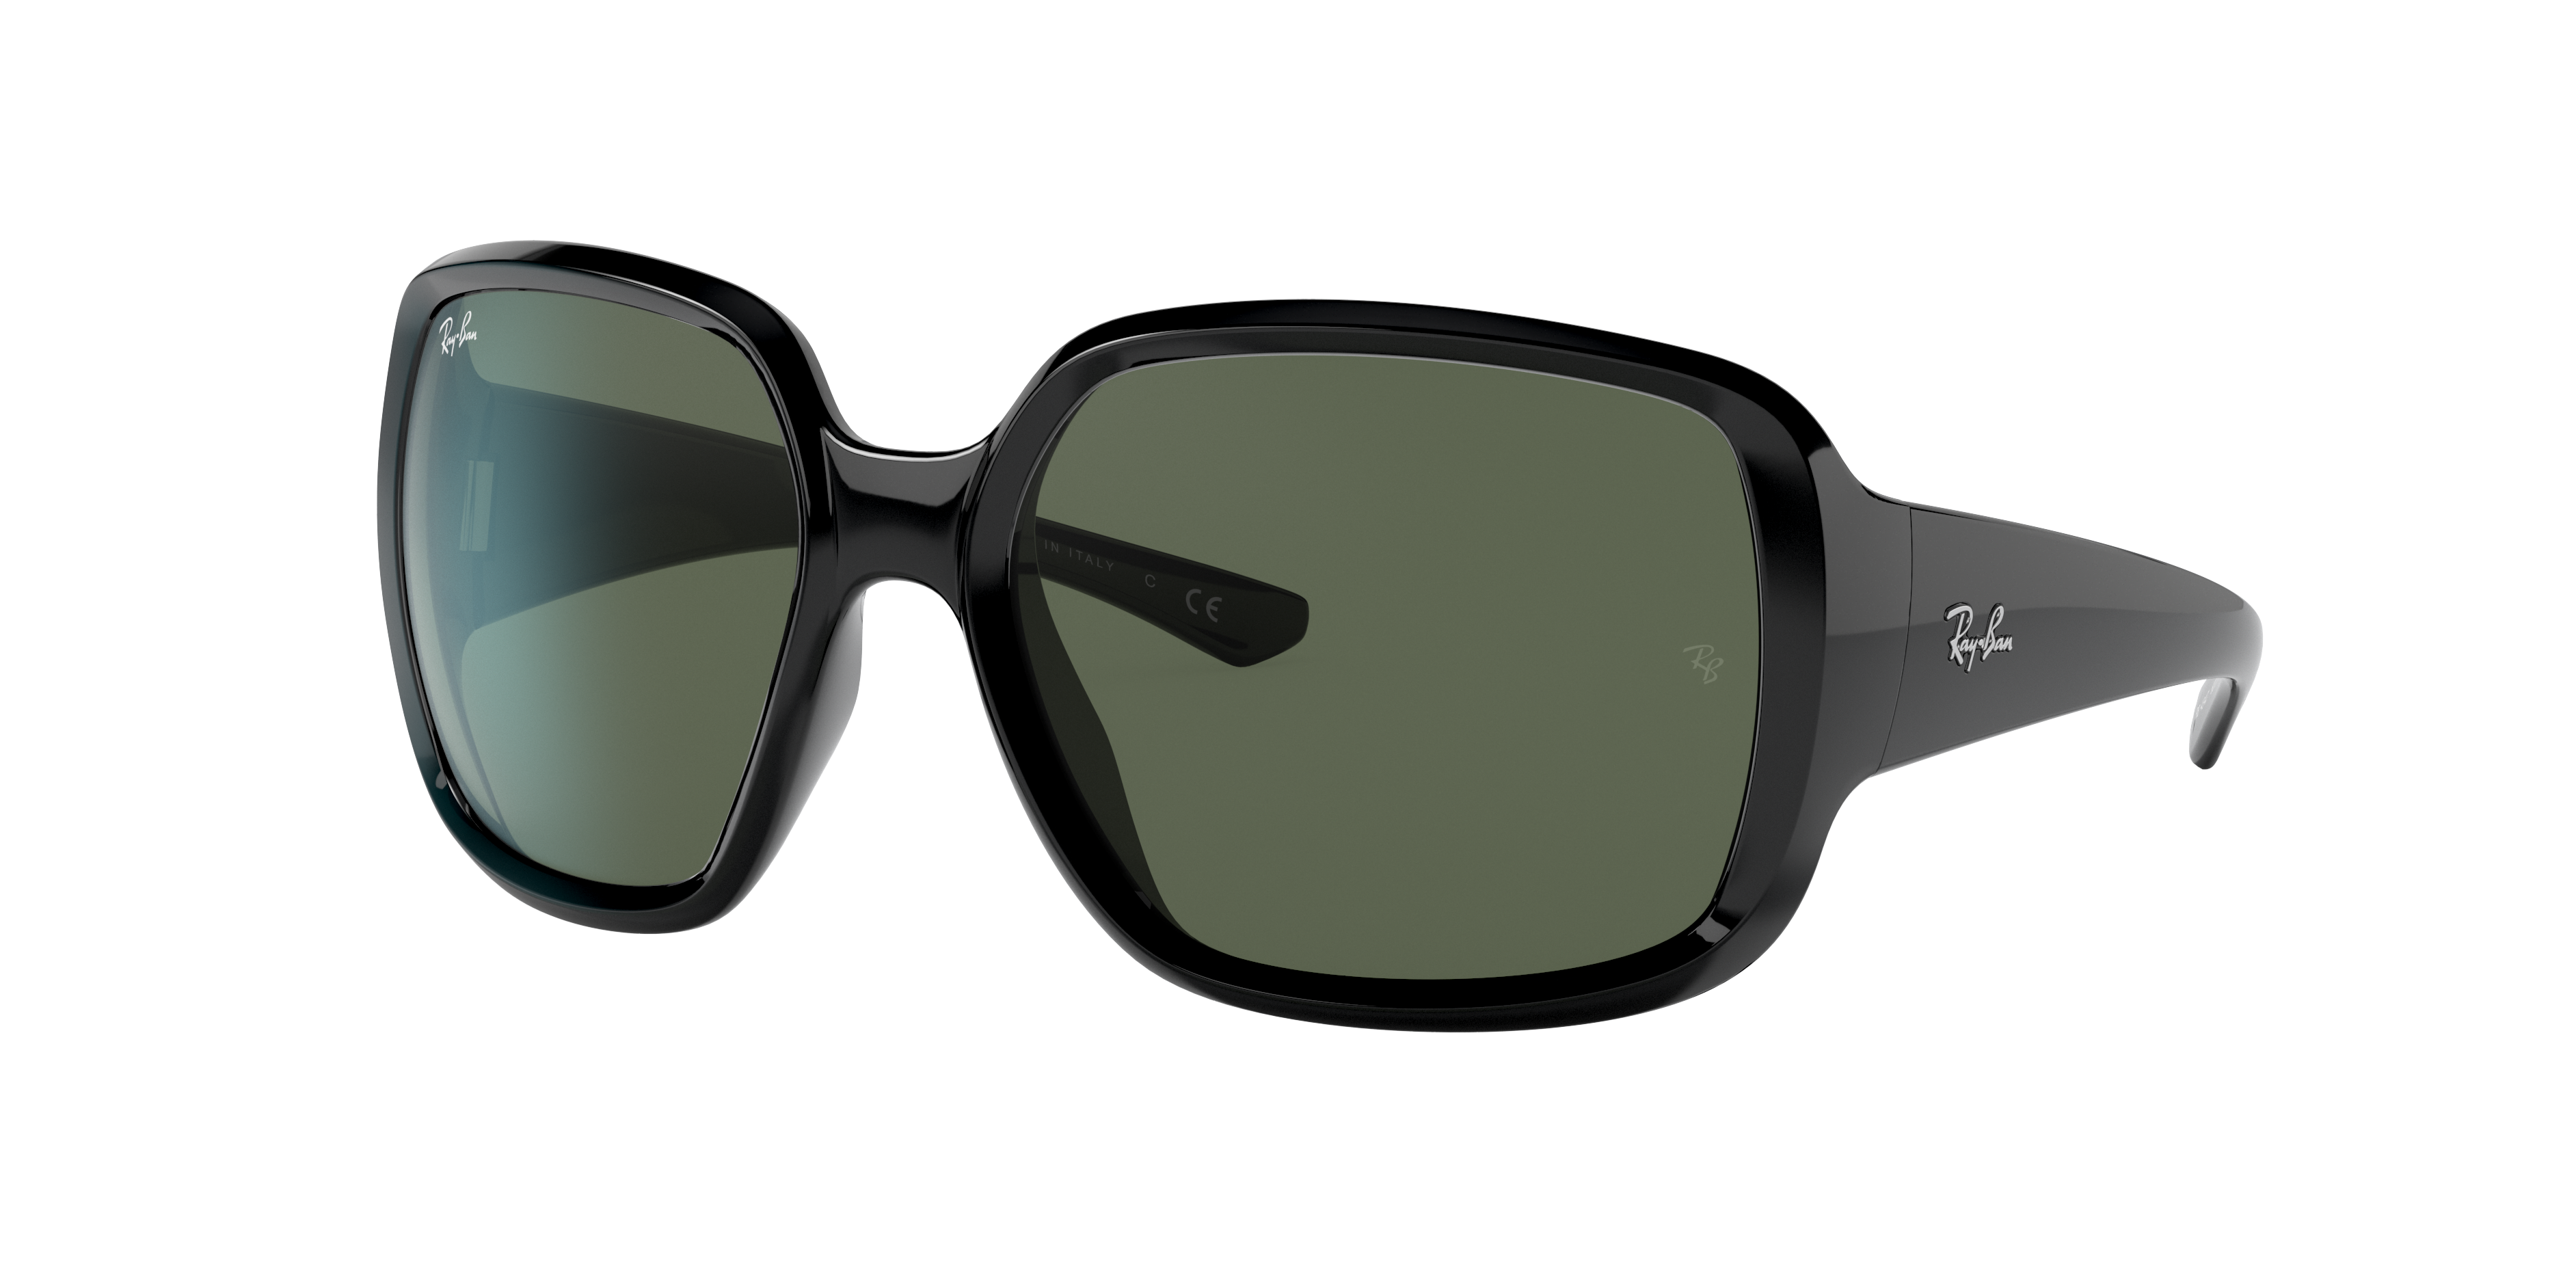 Ray Ban Ray In Green Classic G-15